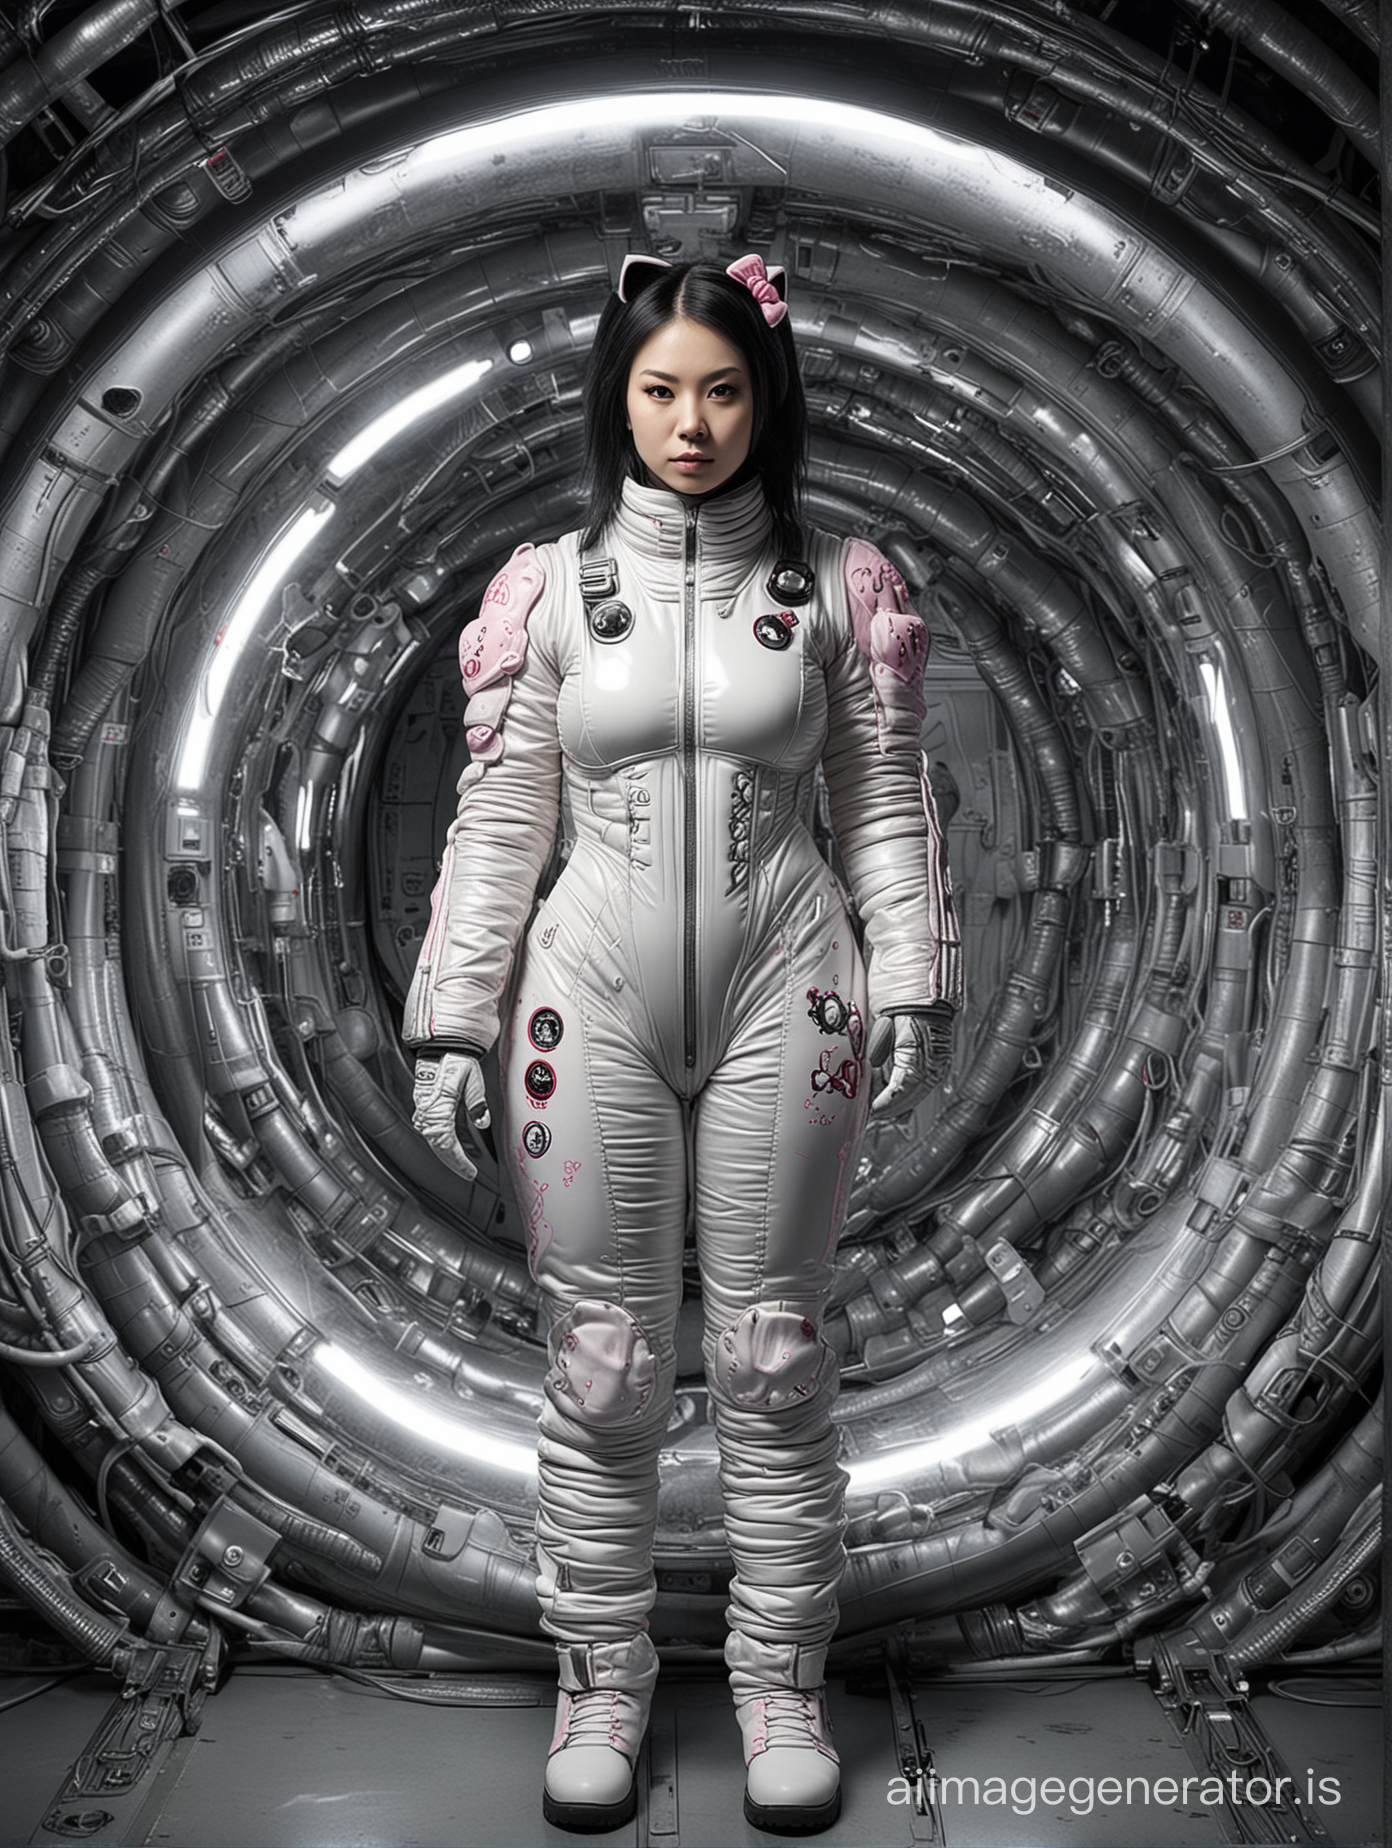 Beautiful woman in spacesuit mashup ofYūko Shimizu ( Hello Kitty) + Giger. Floating in a spherical padded scifi room, with Hello Kitty posters and giger alien posters on the walls.
